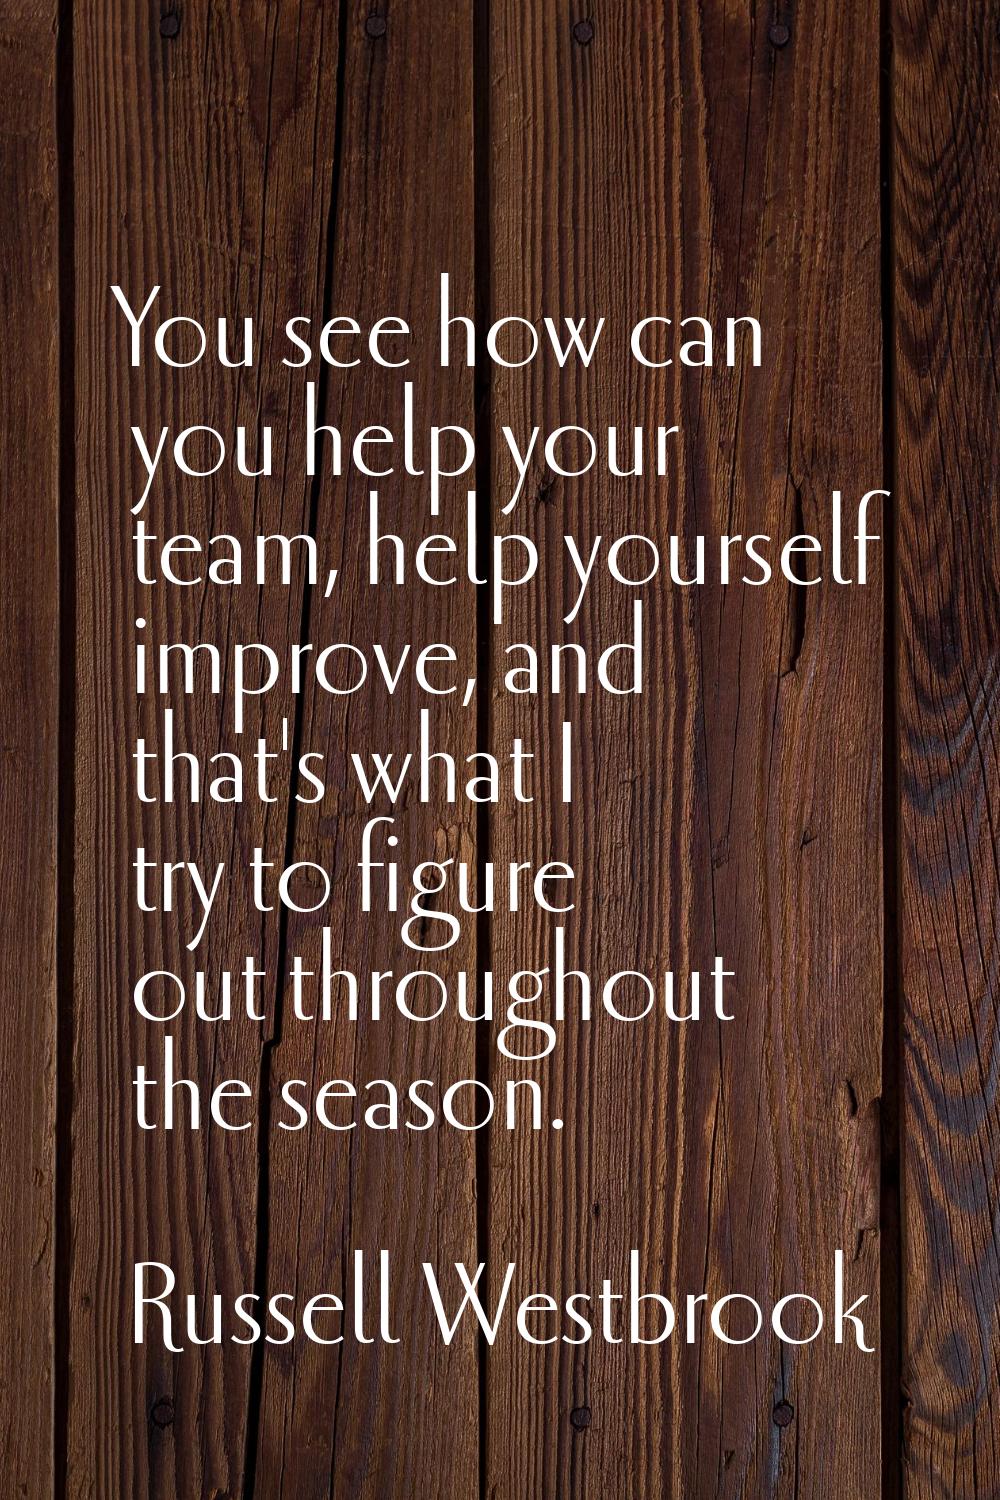 You see how can you help your team, help yourself improve, and that's what I try to figure out thro